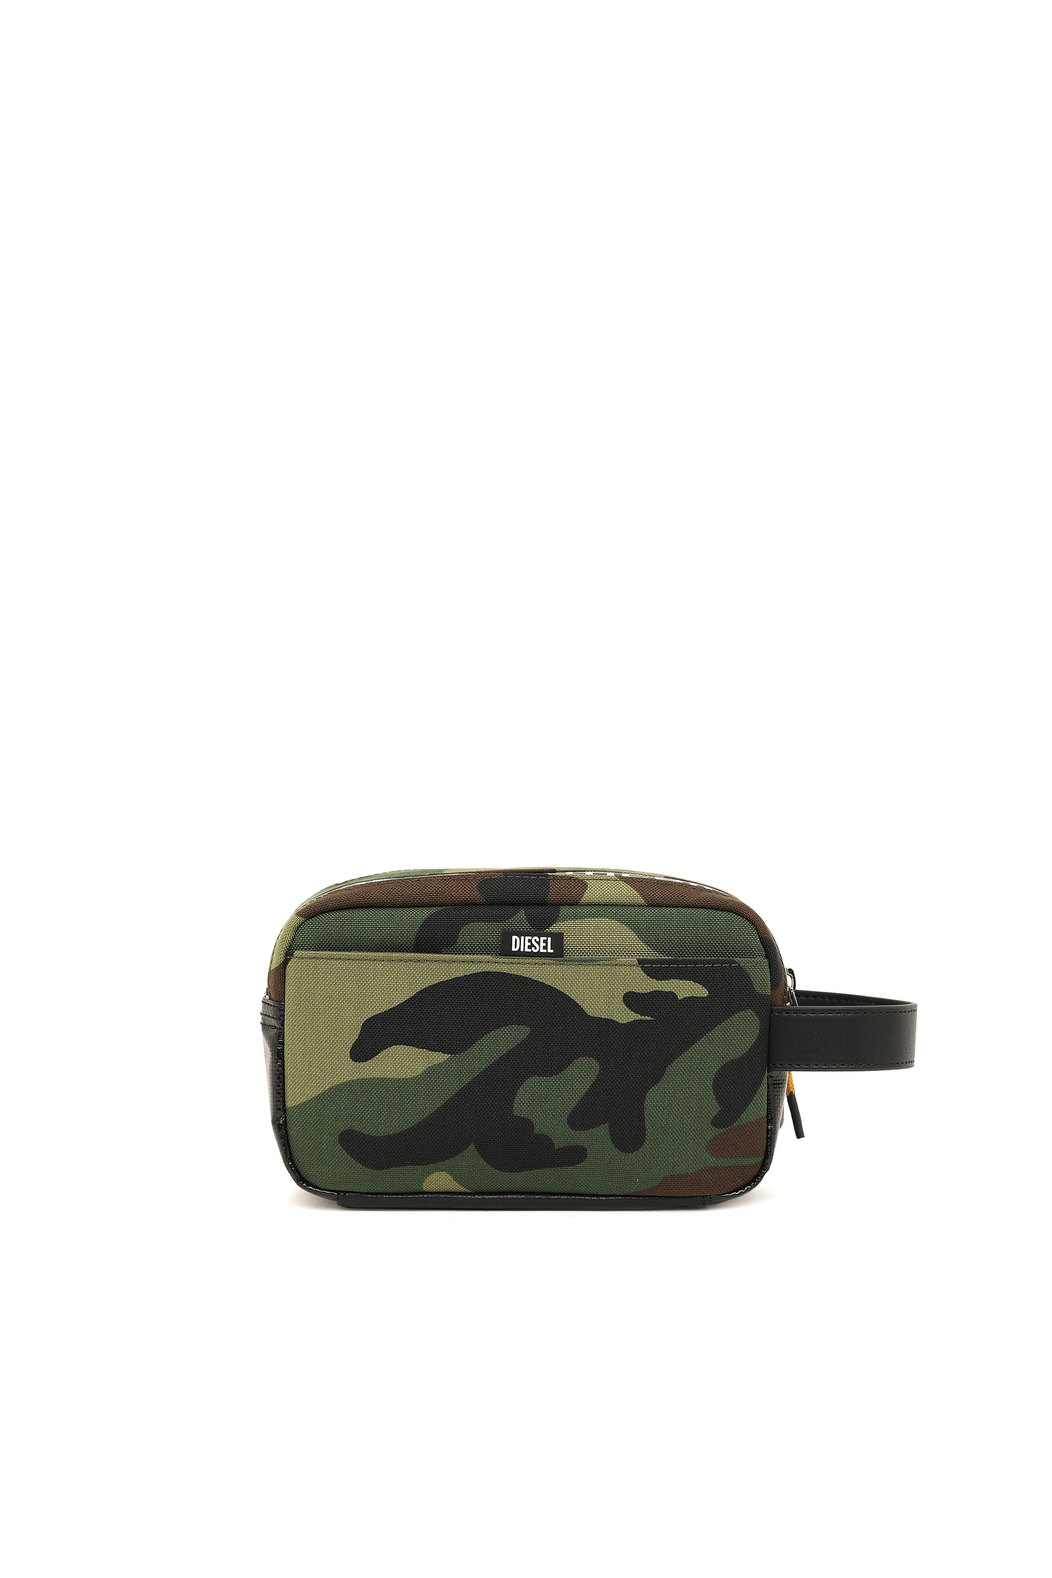 Wash bag in camouflage fabric